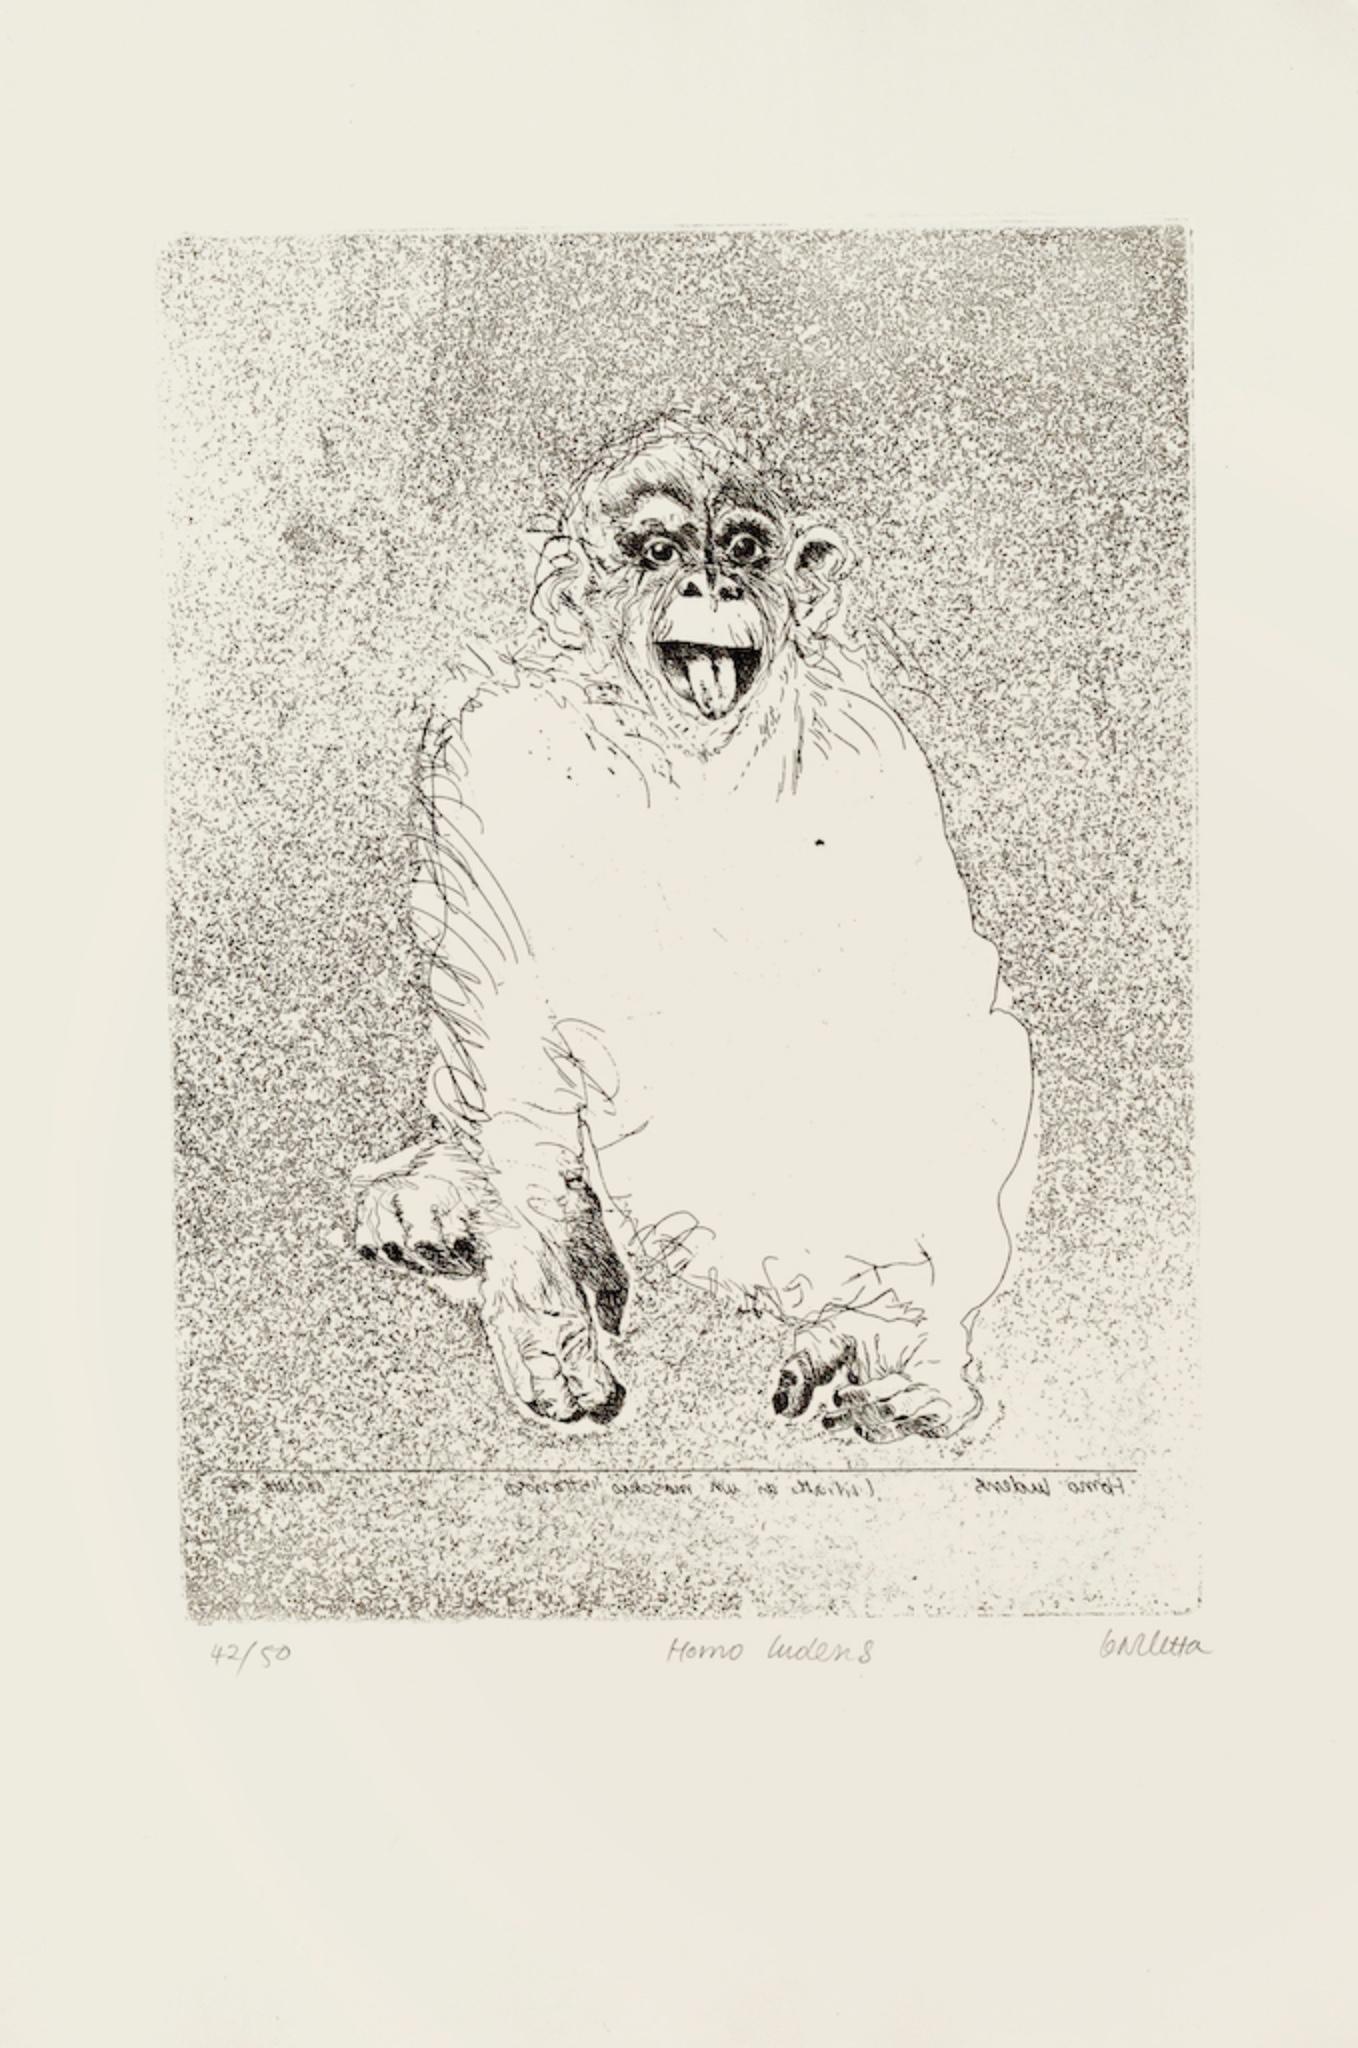 Homo Ludens is an original etching realized by Sergio Barletta in 1991.

Hand-signed lower right in pencil, and titled lower center "Homo Ludens". Numbered lower left, from the edition of 50 prints. Image Dimensions: 33 x 24  cm

In very good